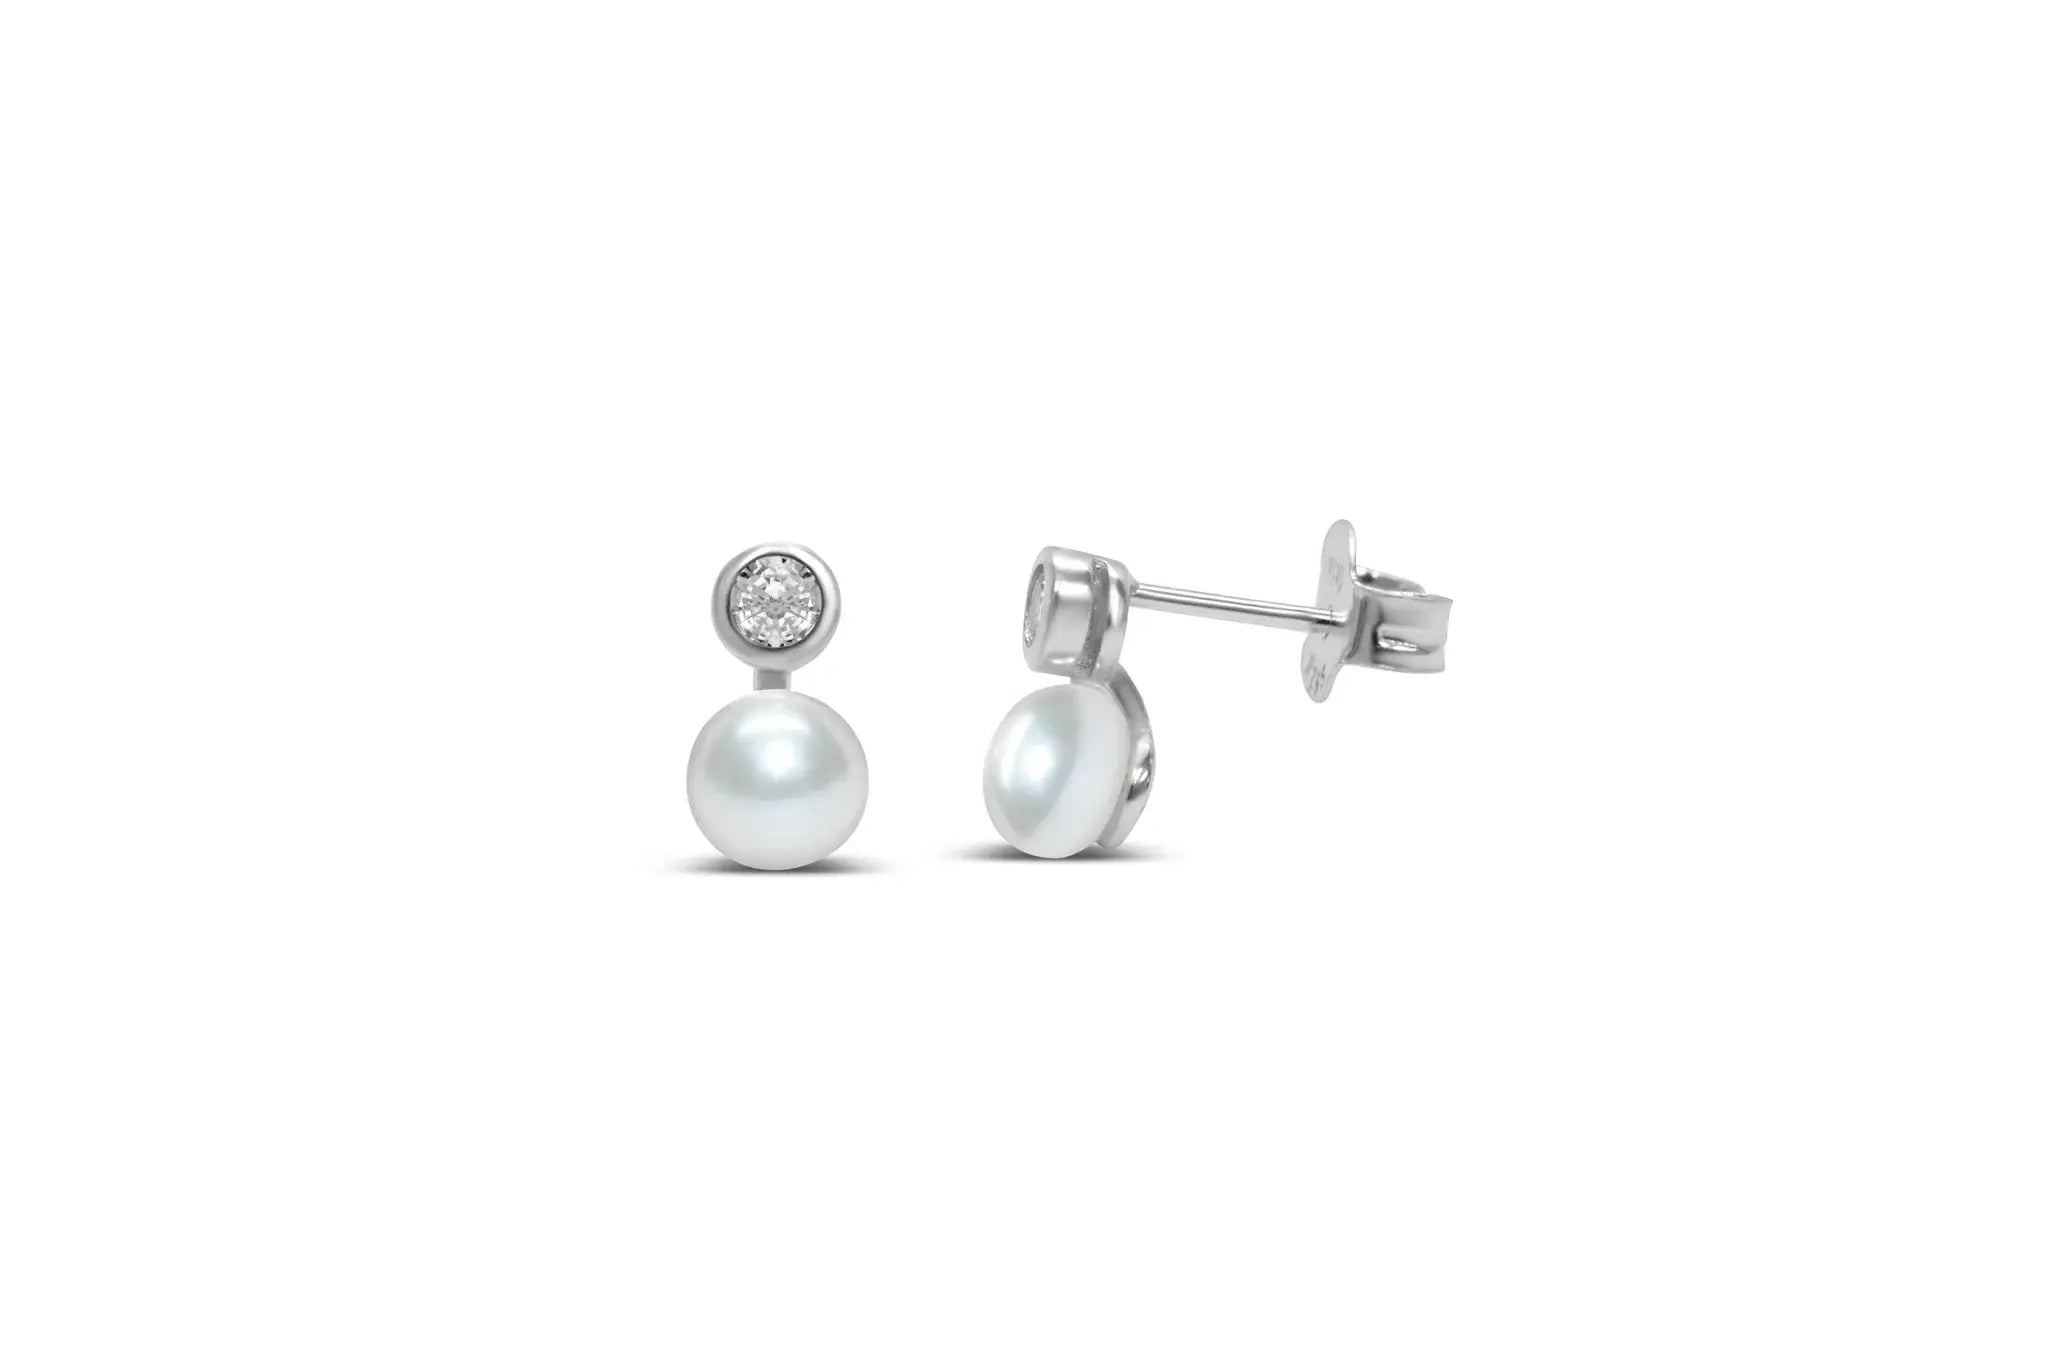 Silver pearl earrings with stud.